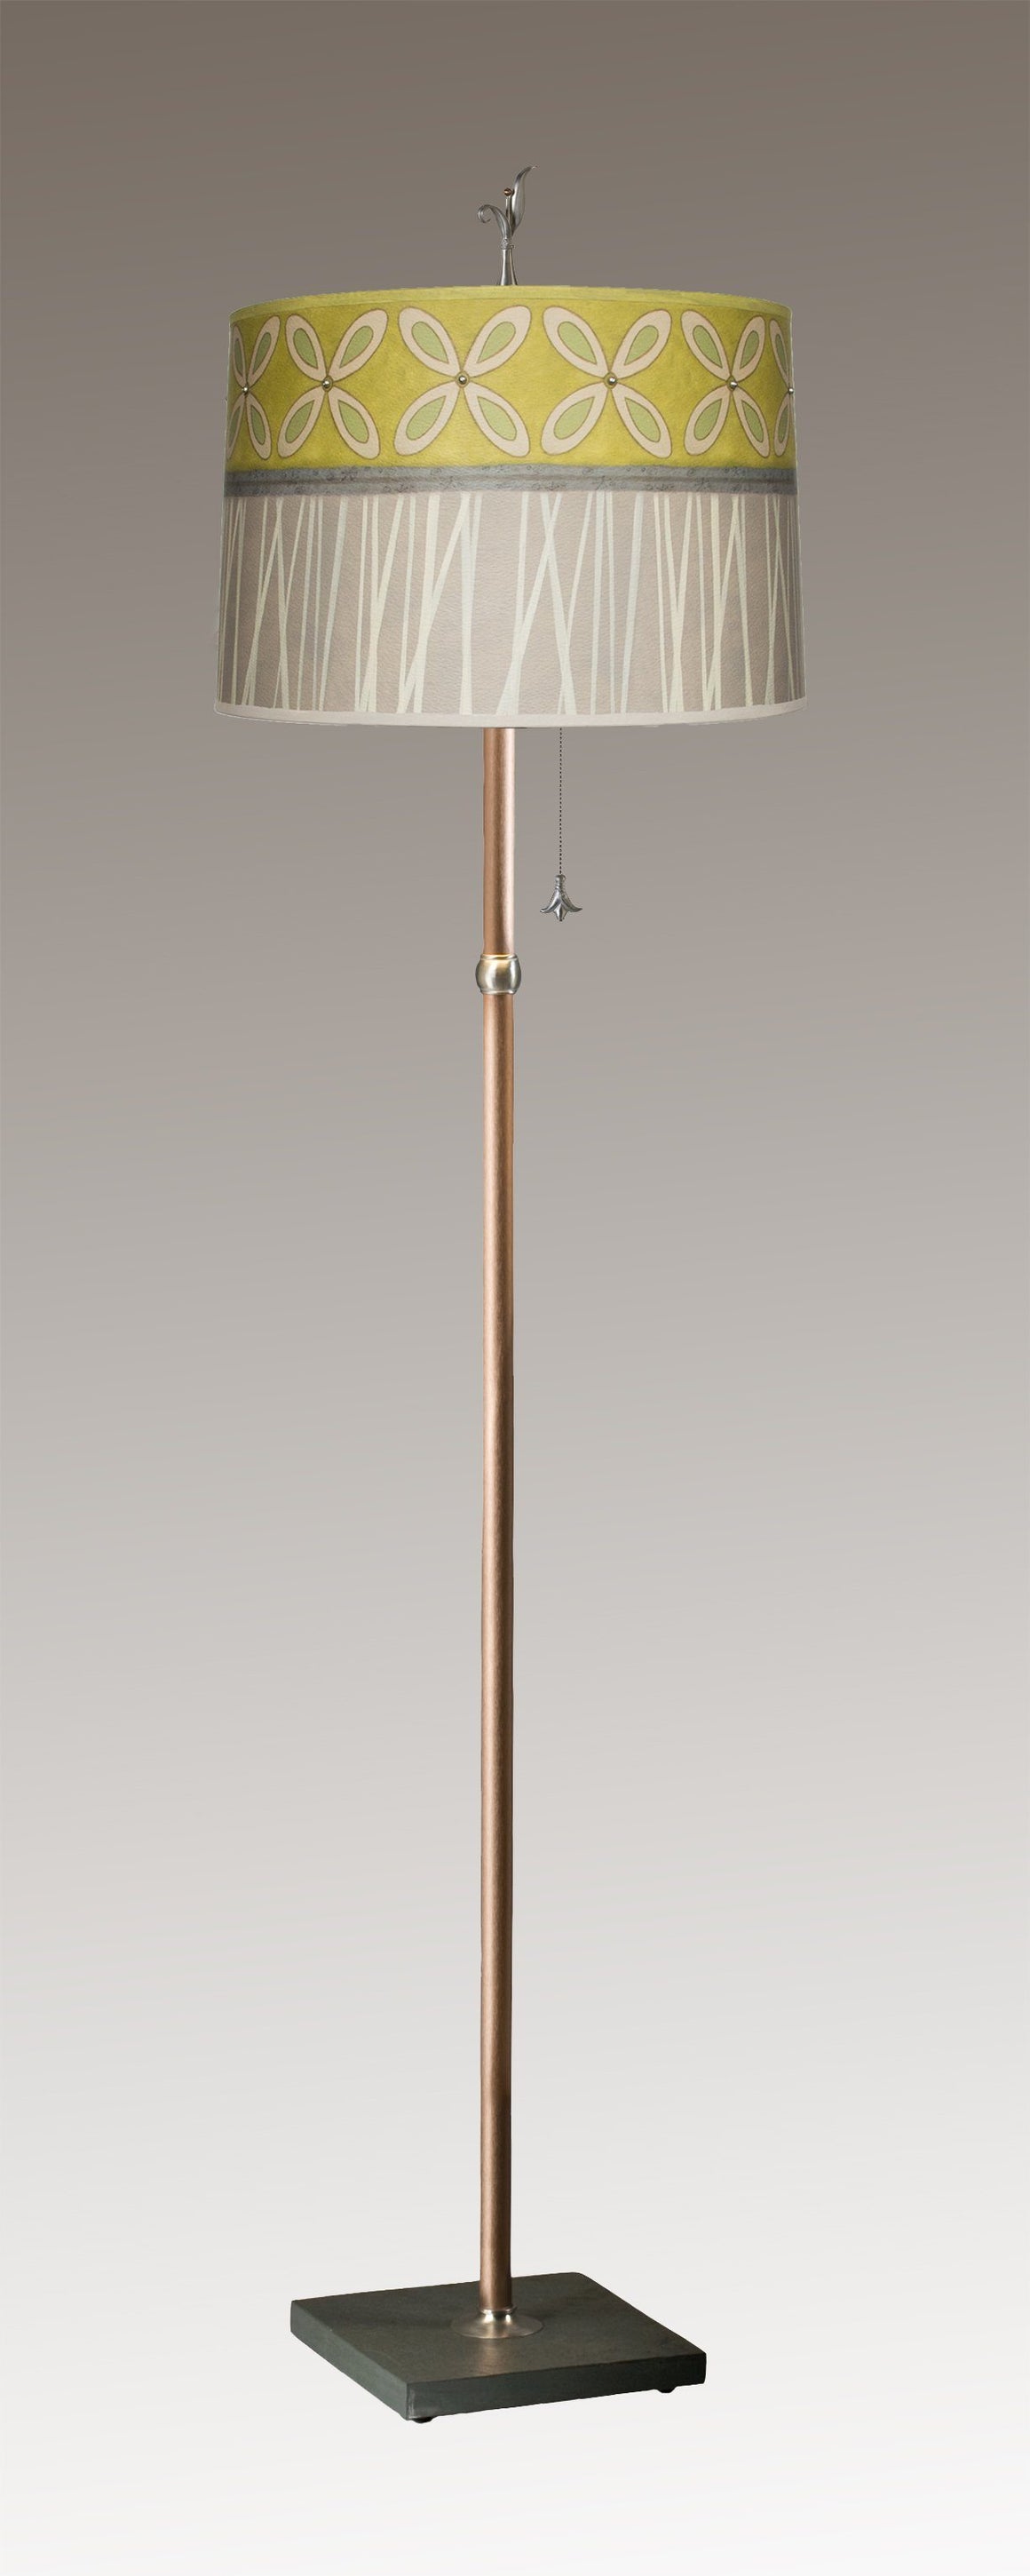 Copper Floor Lamp with Large Drum Shade in Kiwi